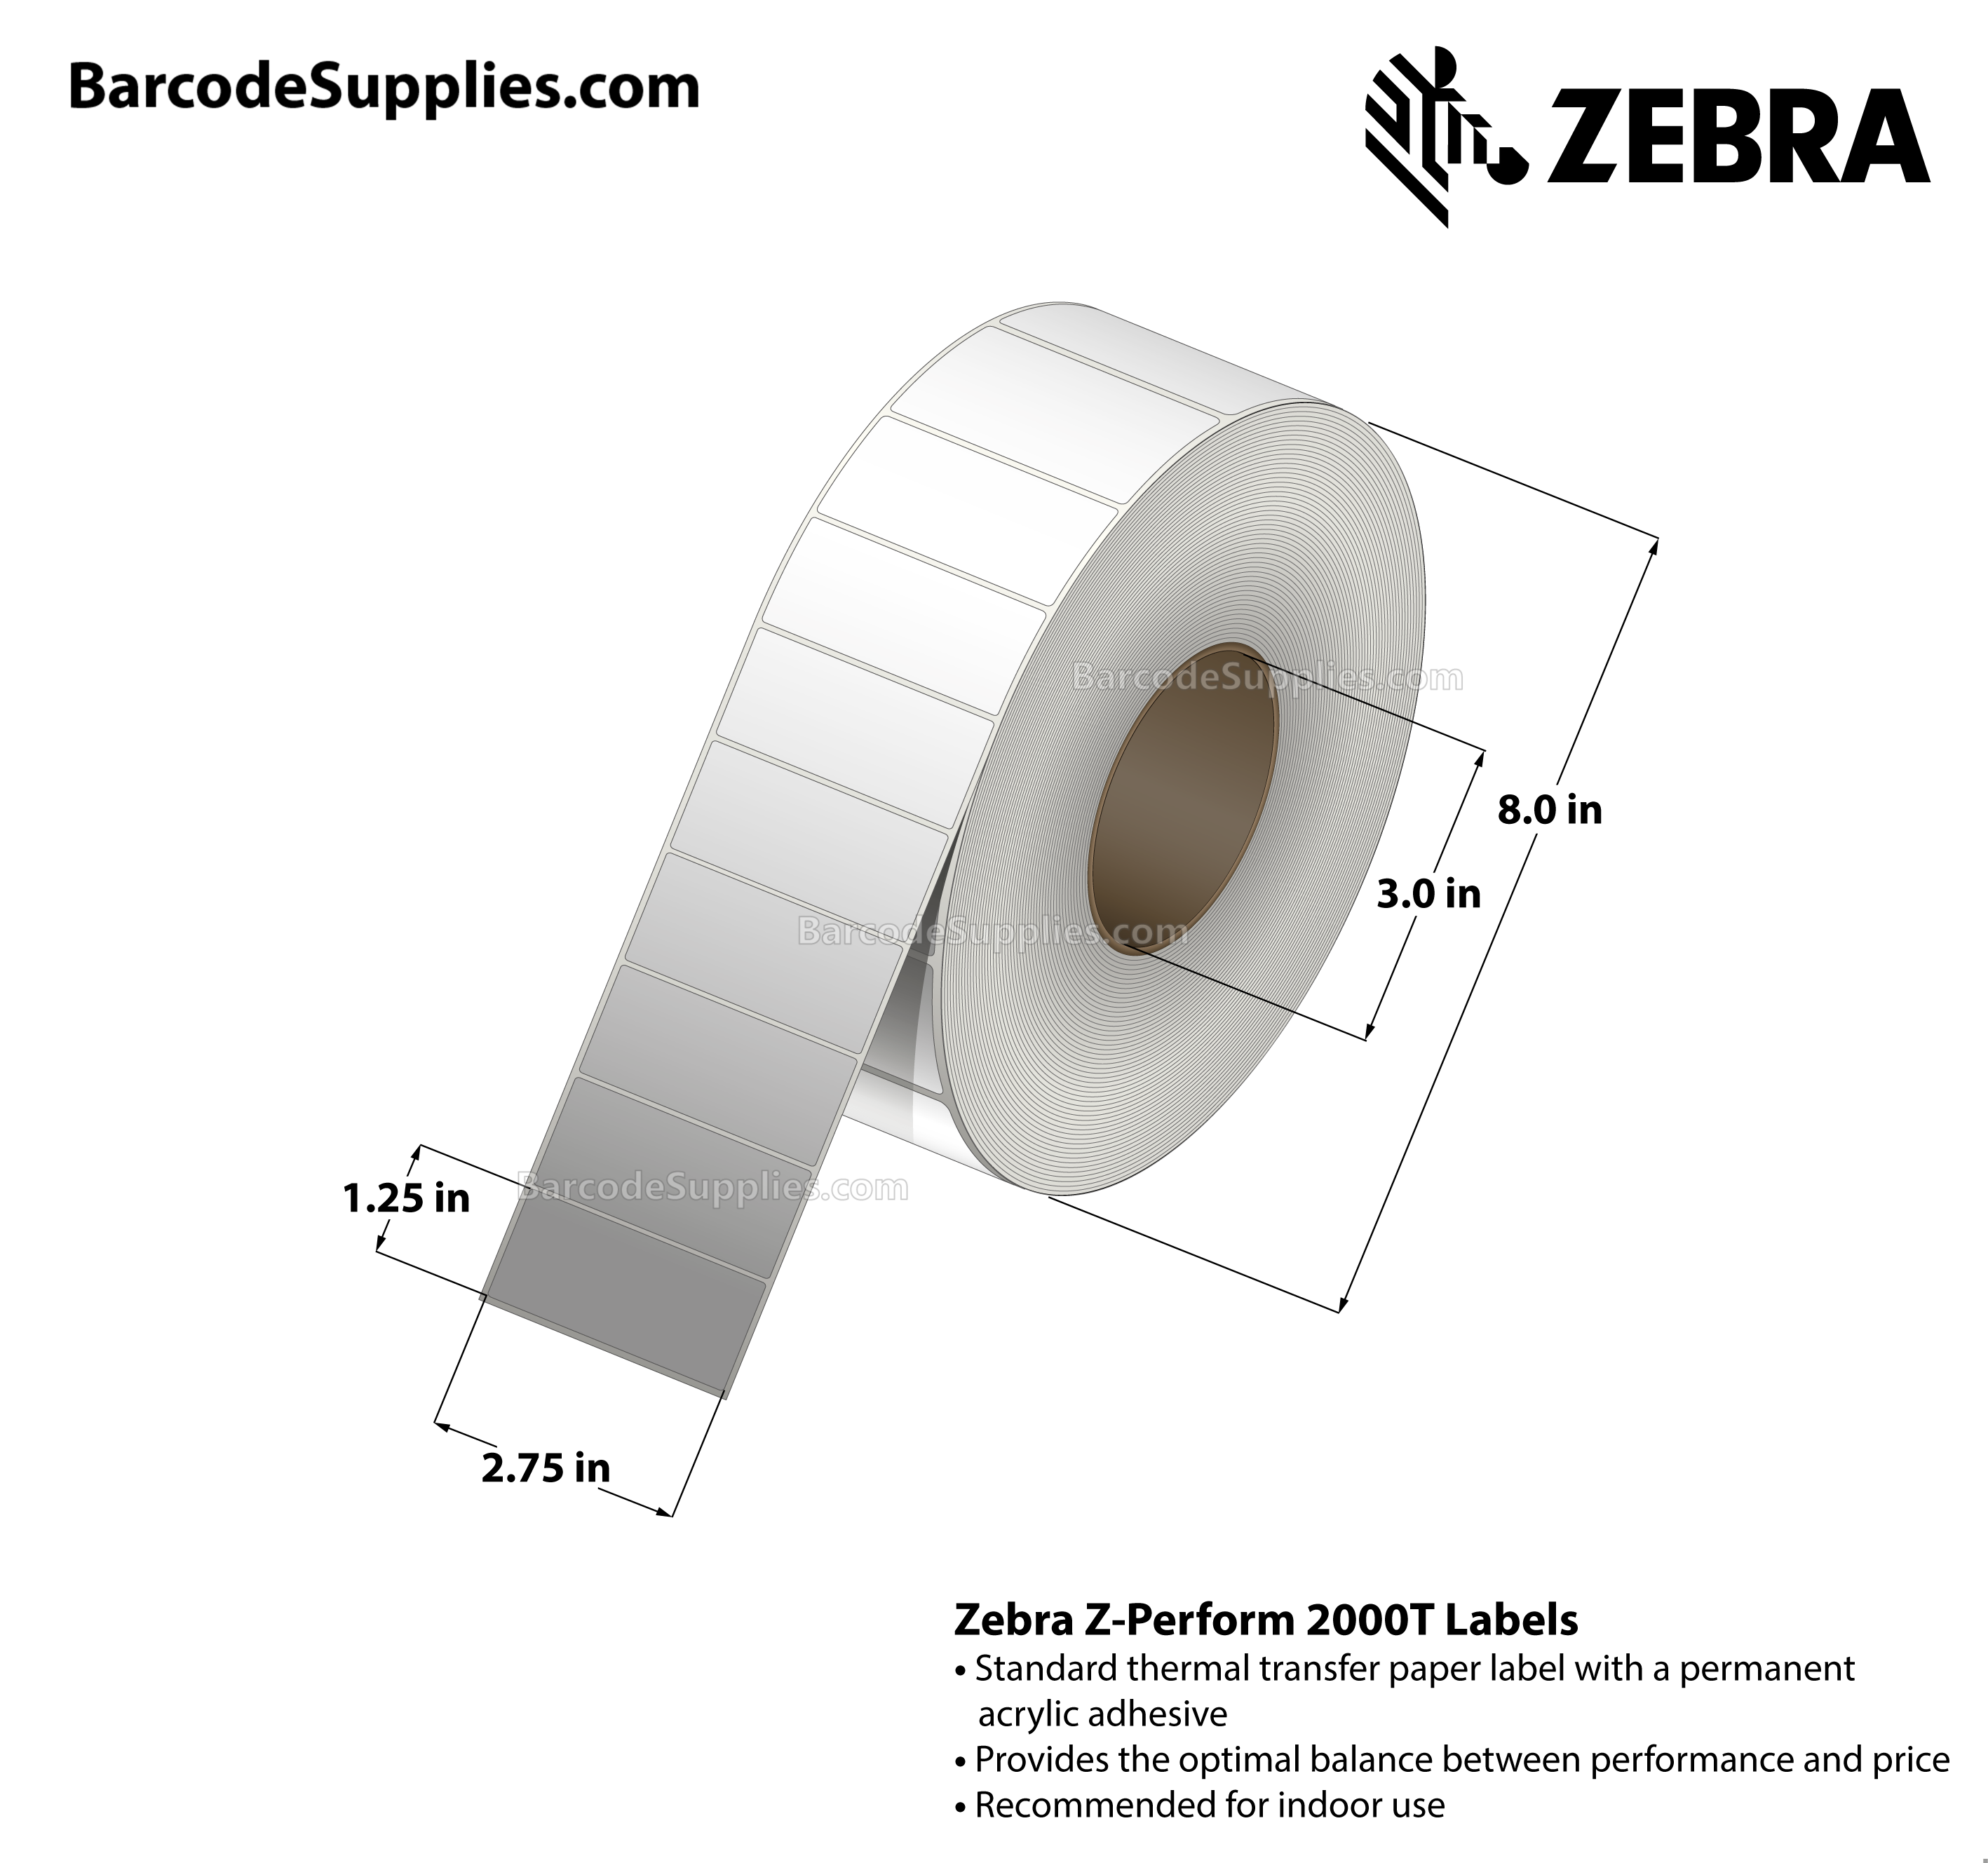 2.75 x 1.25 Thermal Transfer White Z-Perform 2000T All-Temp Labels With All-Temp Adhesive - Not Perforated - 4240 Labels Per Roll - Carton Of 8 Rolls - 33920 Labels Total - MPN: 72369